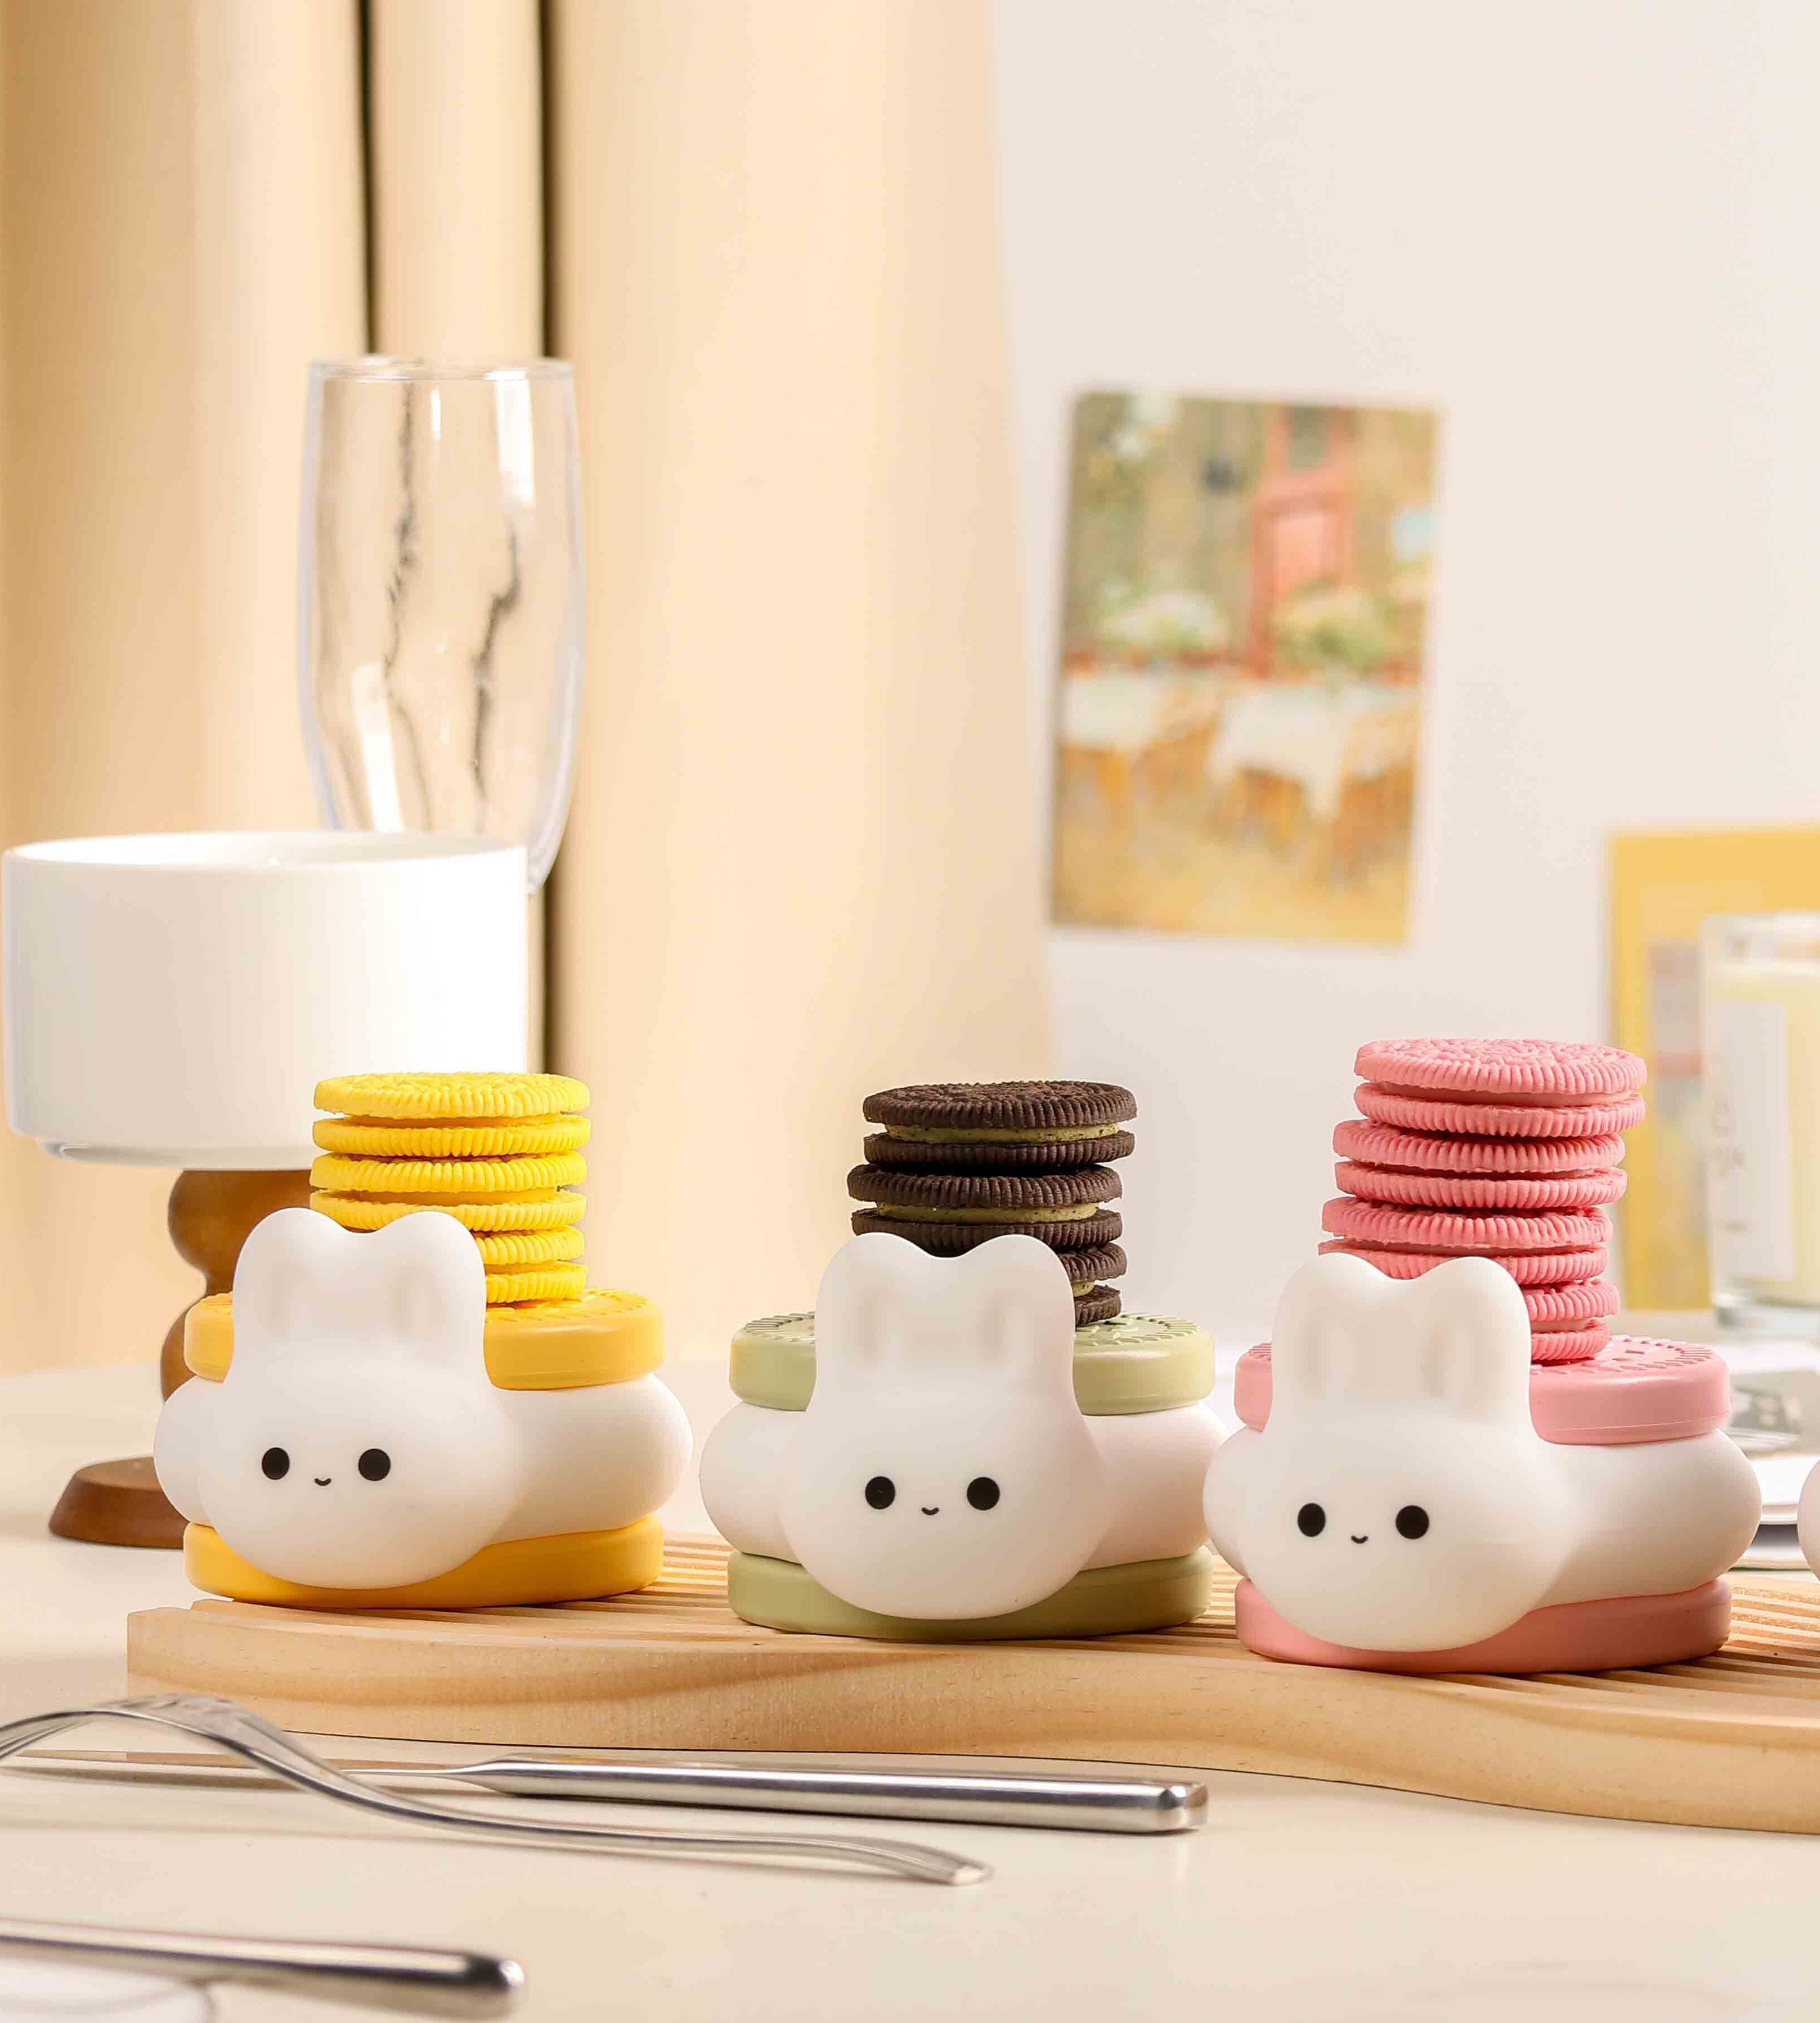 Enhance Your Decor with the Cutest LED Night Lights Available